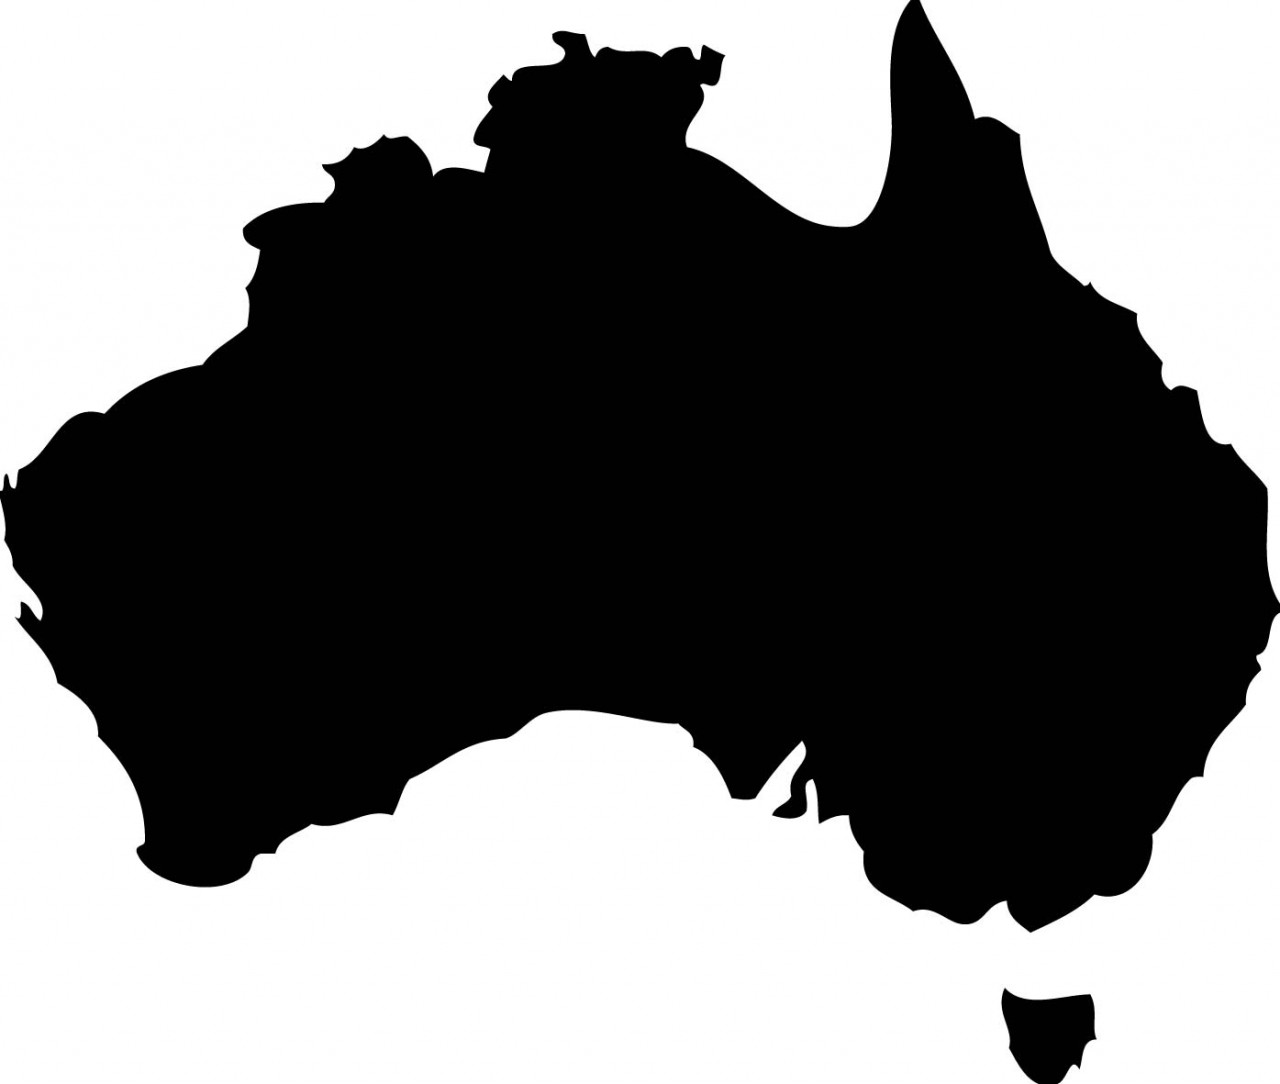 Black And White Map Of Australia - ClipArt Best